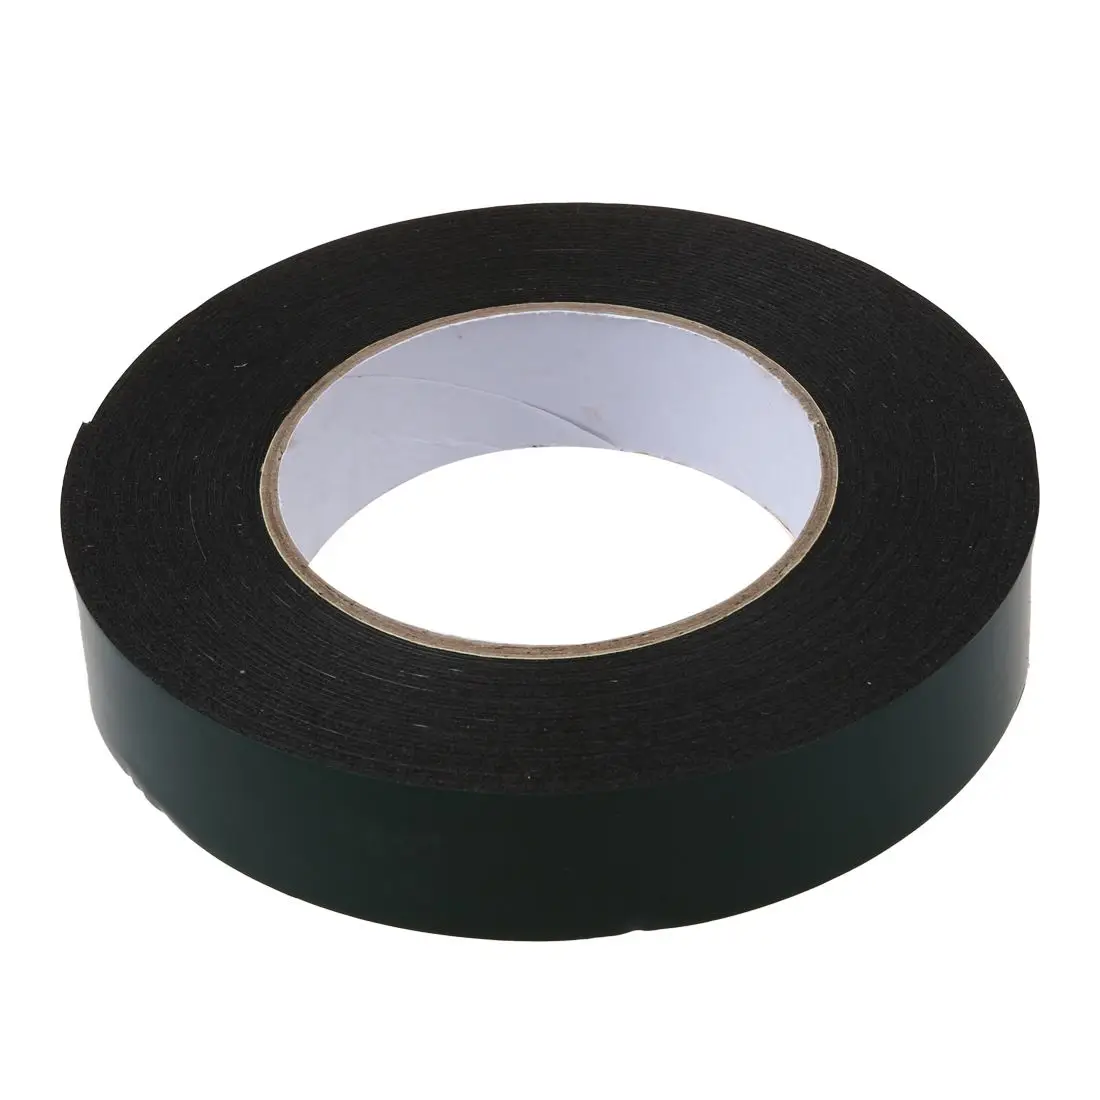 

Black Super Strong Permanent Double Sided Self Adhesive Foam Car Trim Body Tape width:25Mm